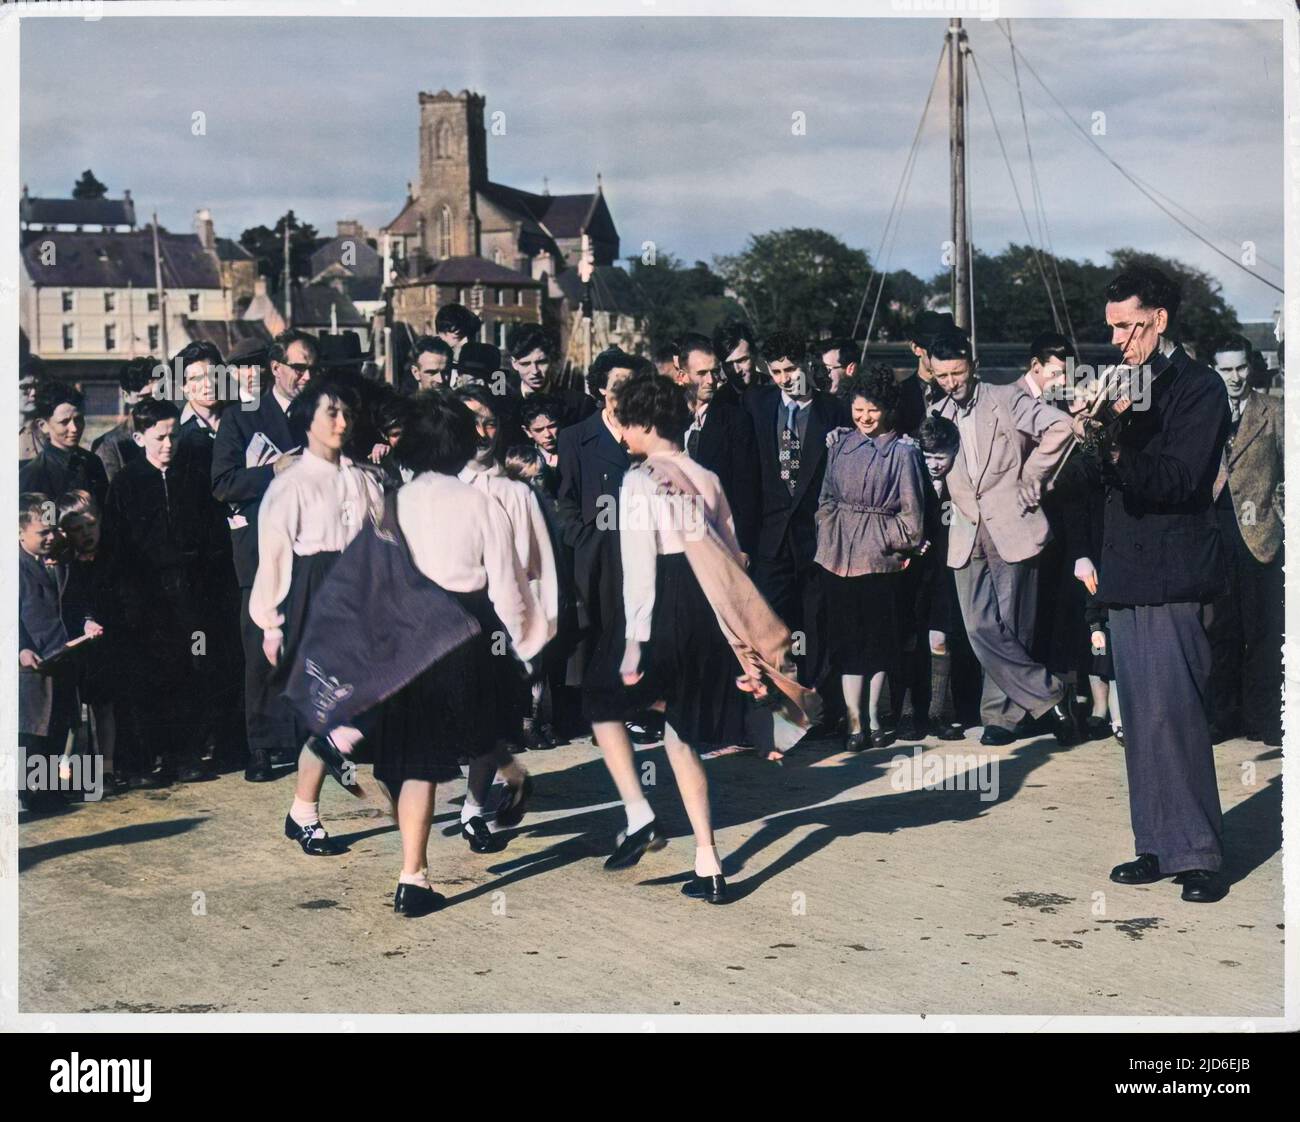 A crowd watching girls performing traditional Irish dancing at Killybegs, County Donegal, Ireland. Colourised version of : 10152251       Date: 1950s Stock Photo